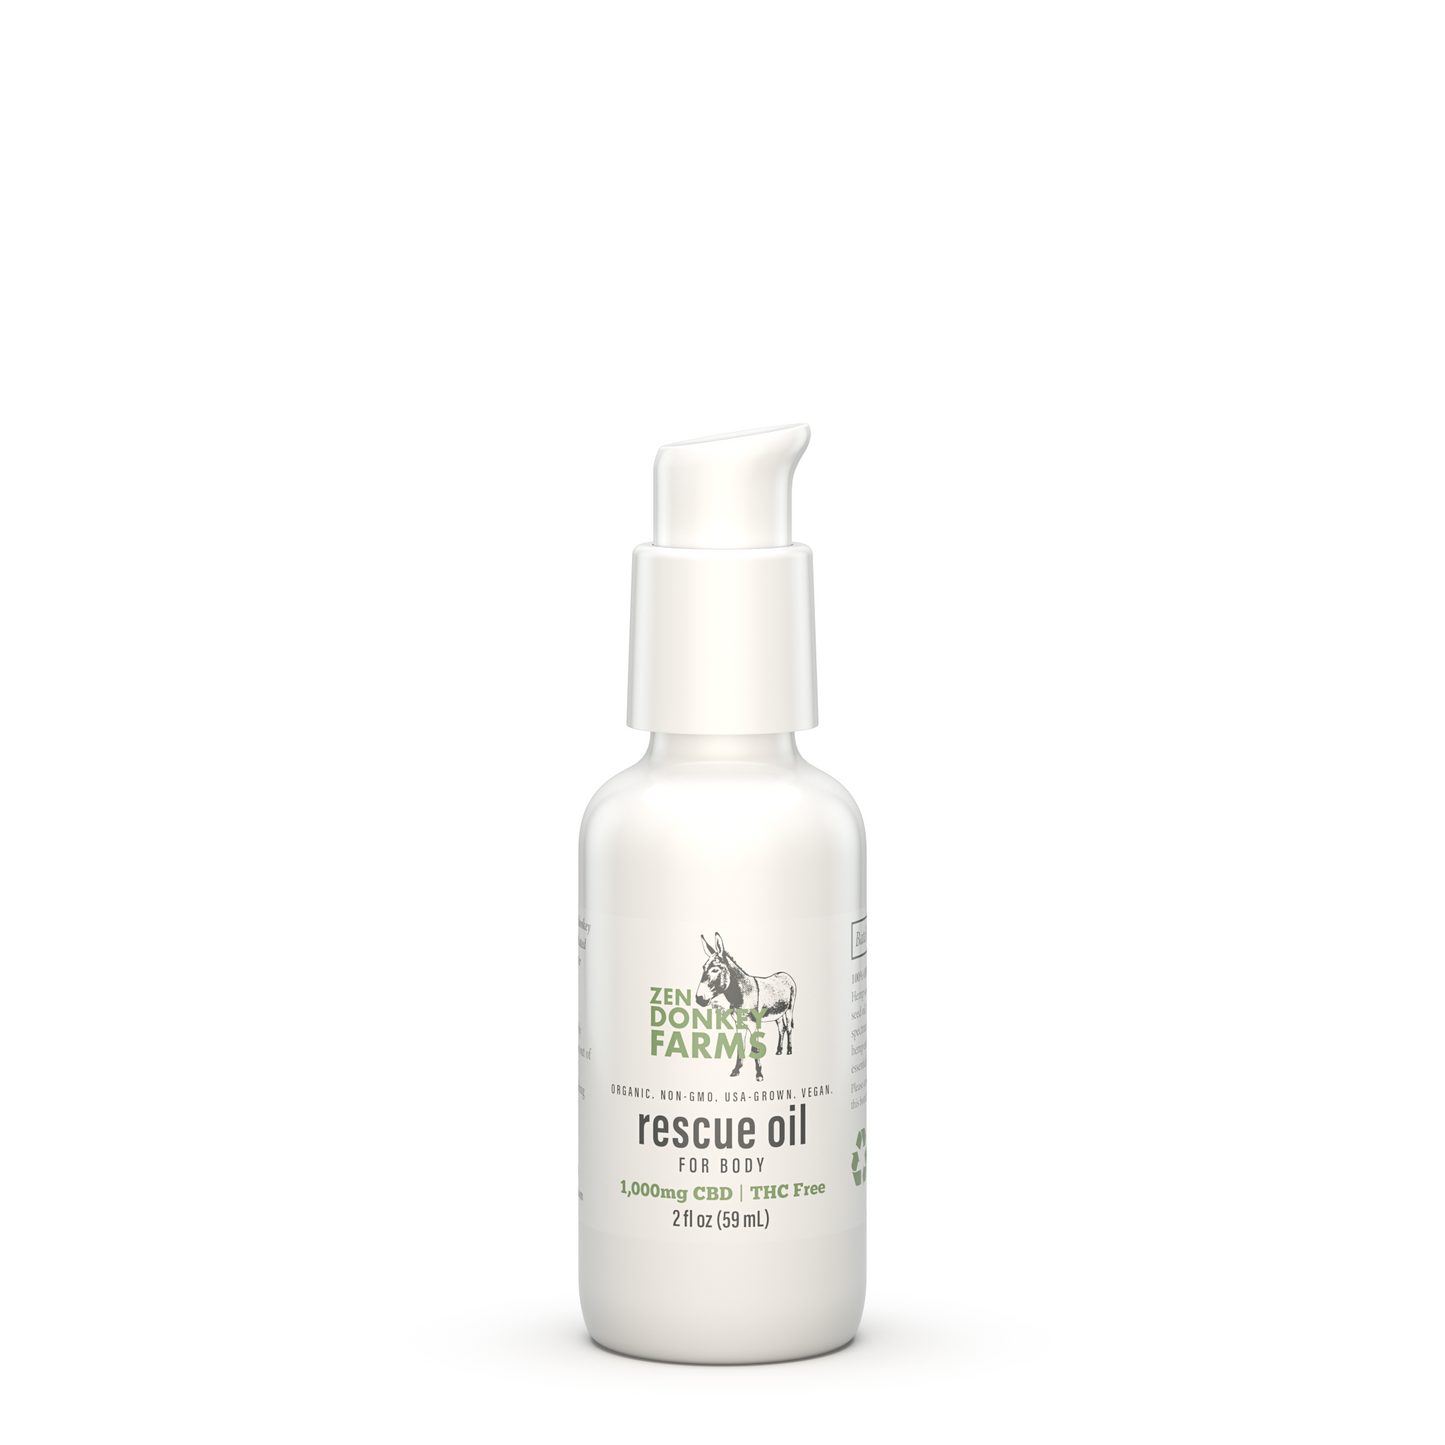 Rescue Oil for face and body (1,000mg CBD)